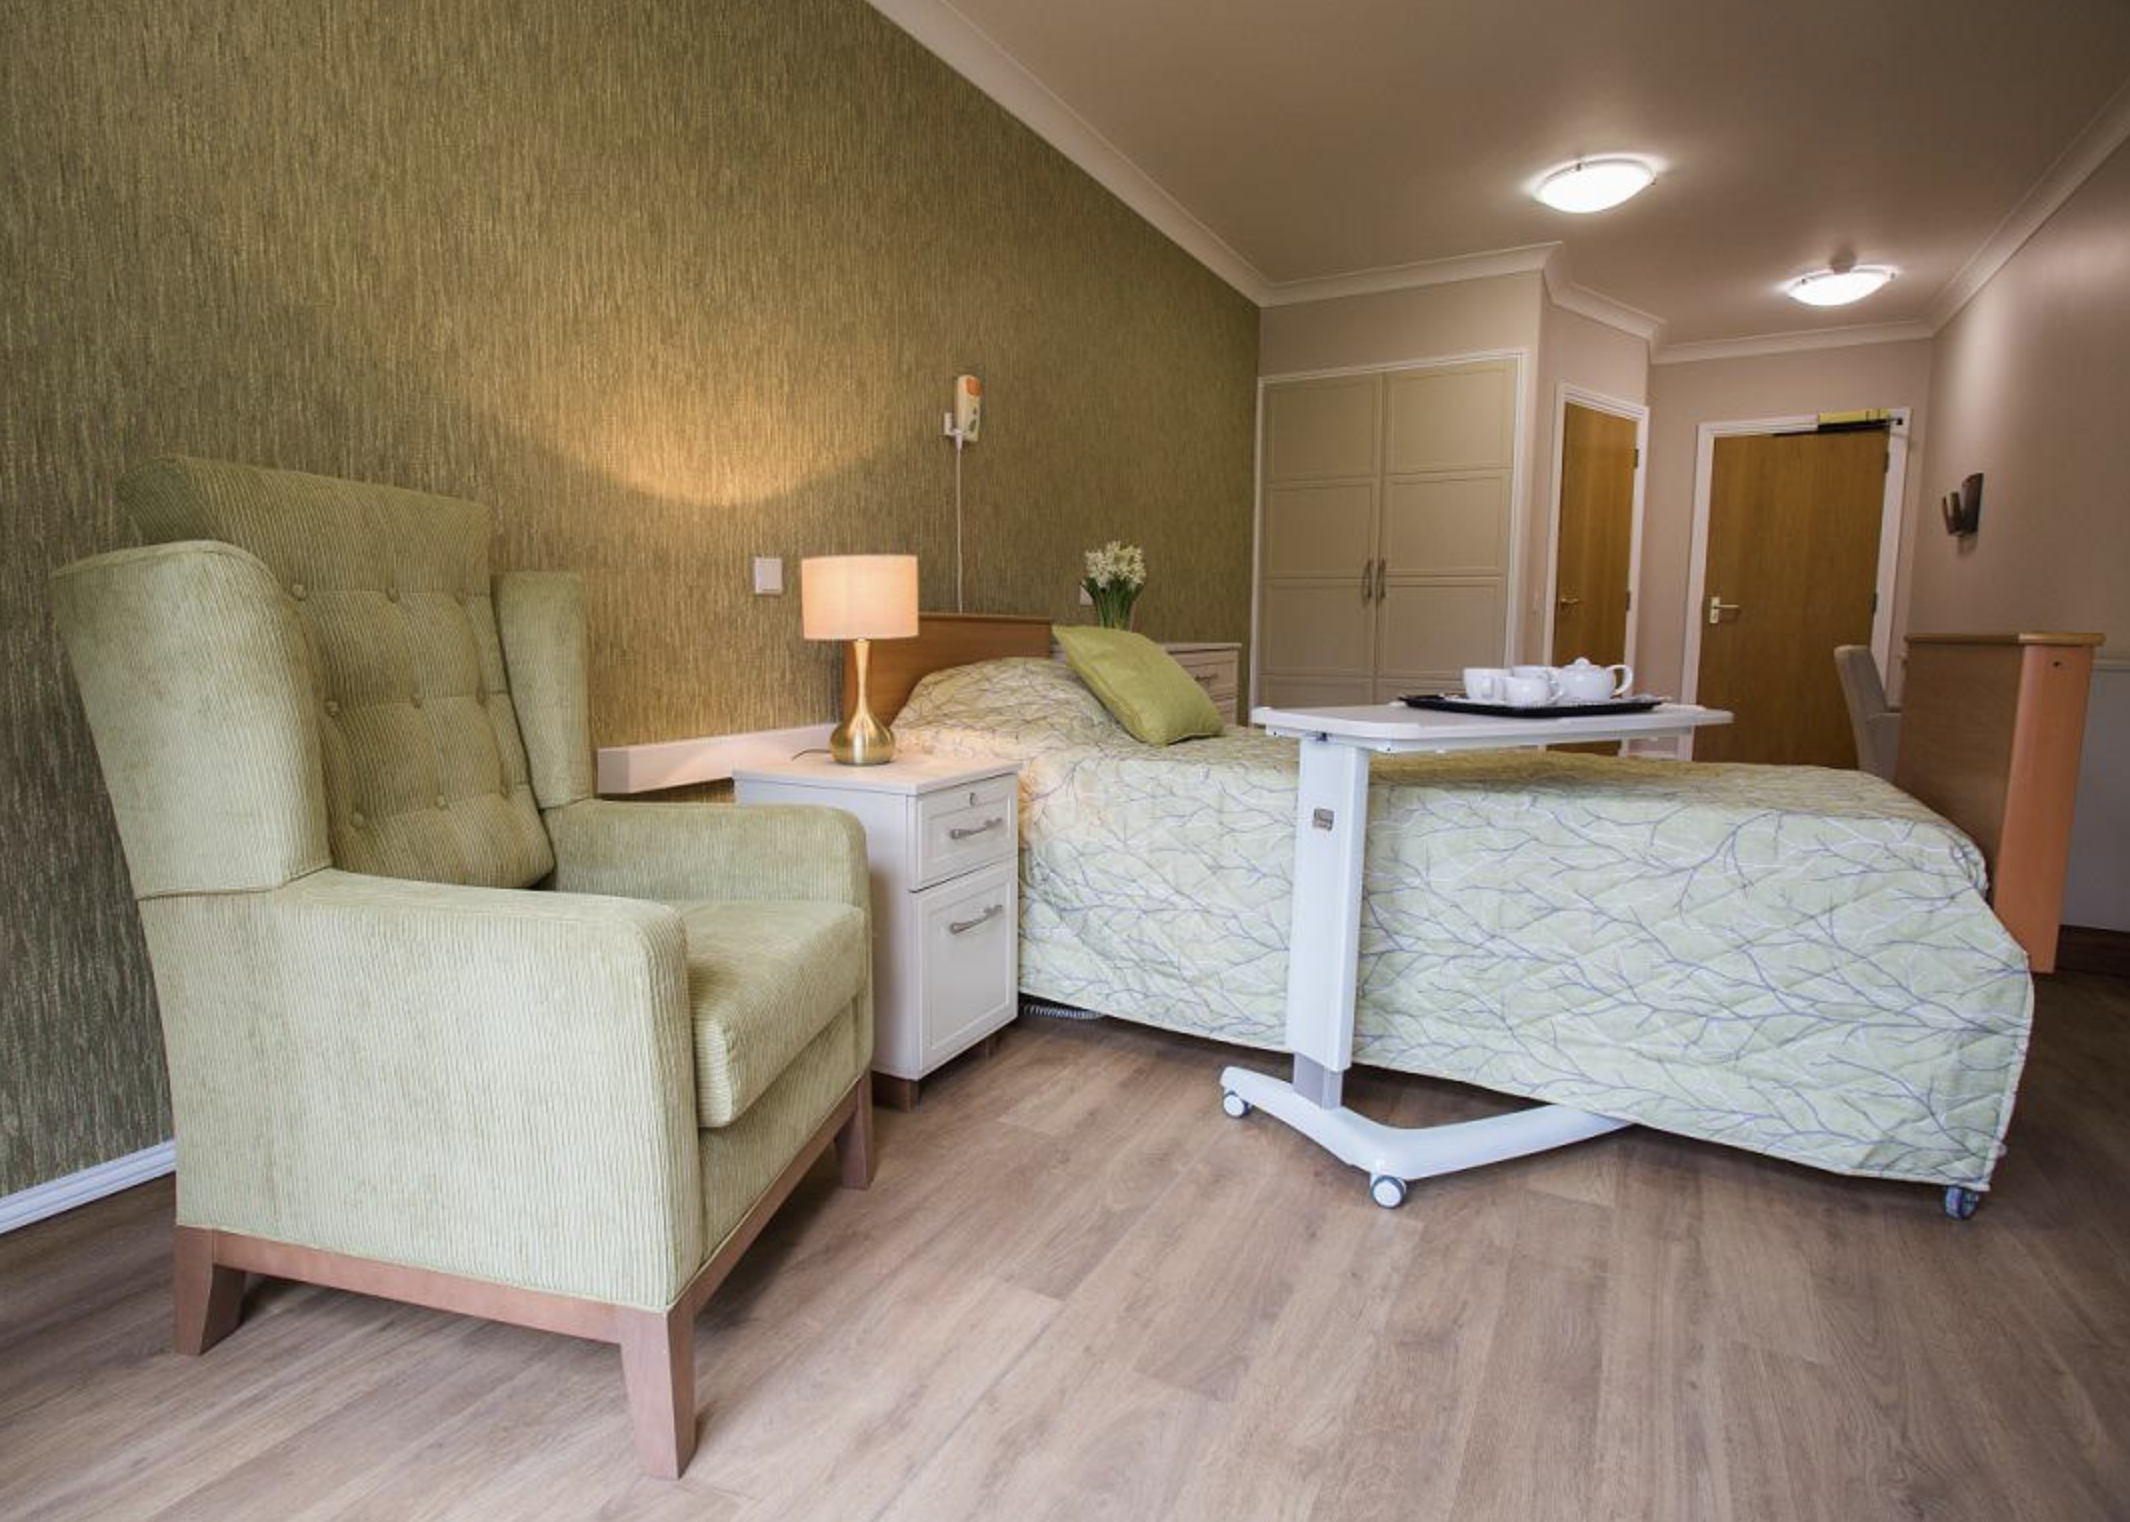 Bedroom of Ardenlea Grove care home in Solihull, West Midlands